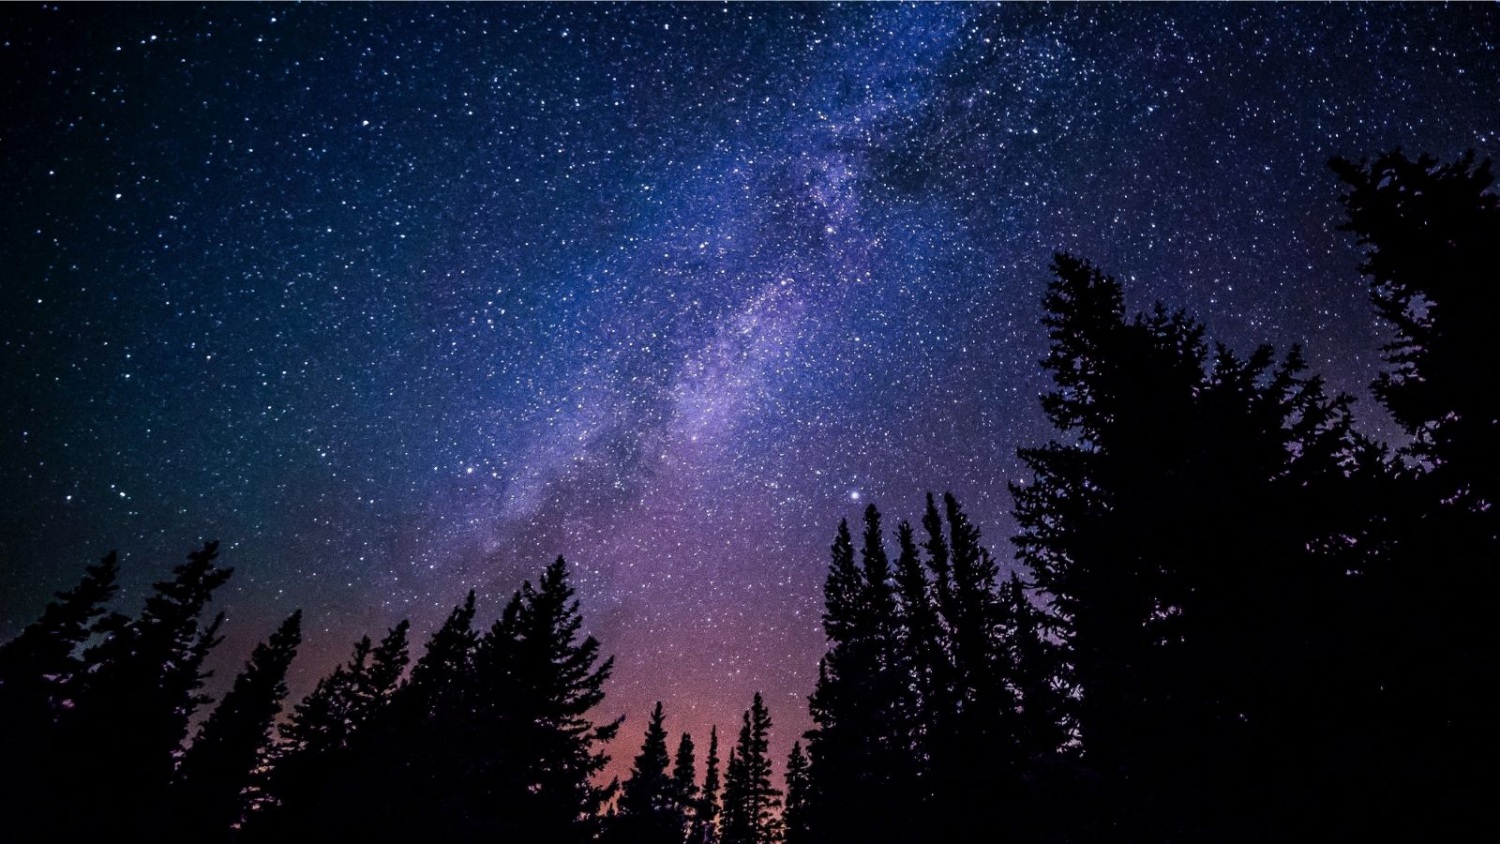 Starry night with trees for energy saving tips based on Zodiac signs